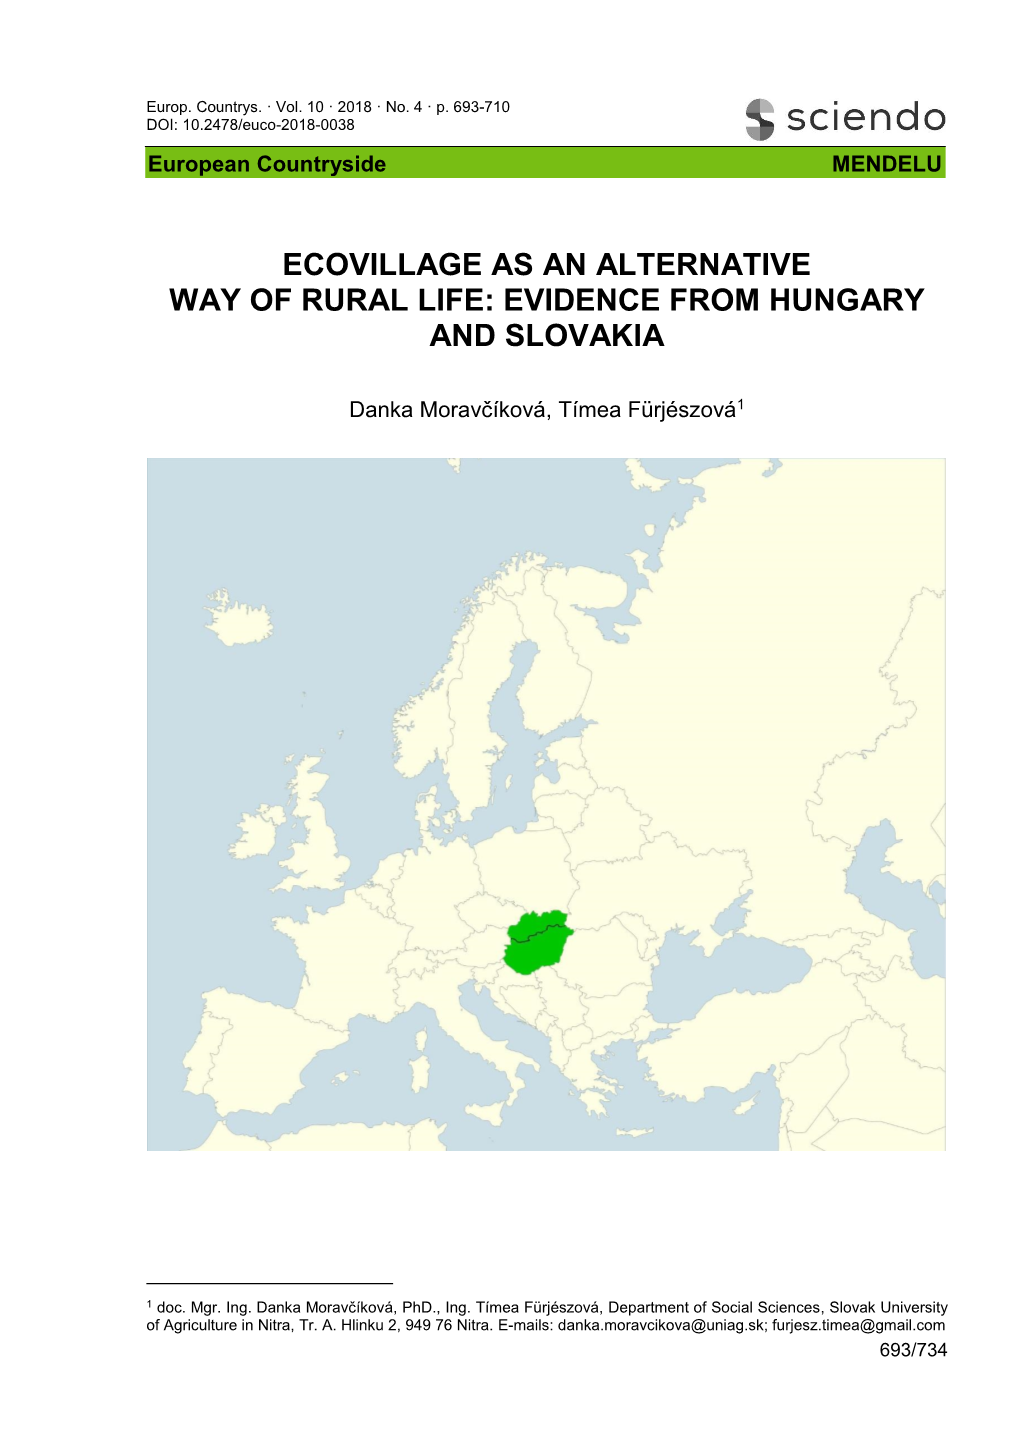 Ecovillage As an Alternative Way of Rural Life: Evidence from Hungary and Slovakia